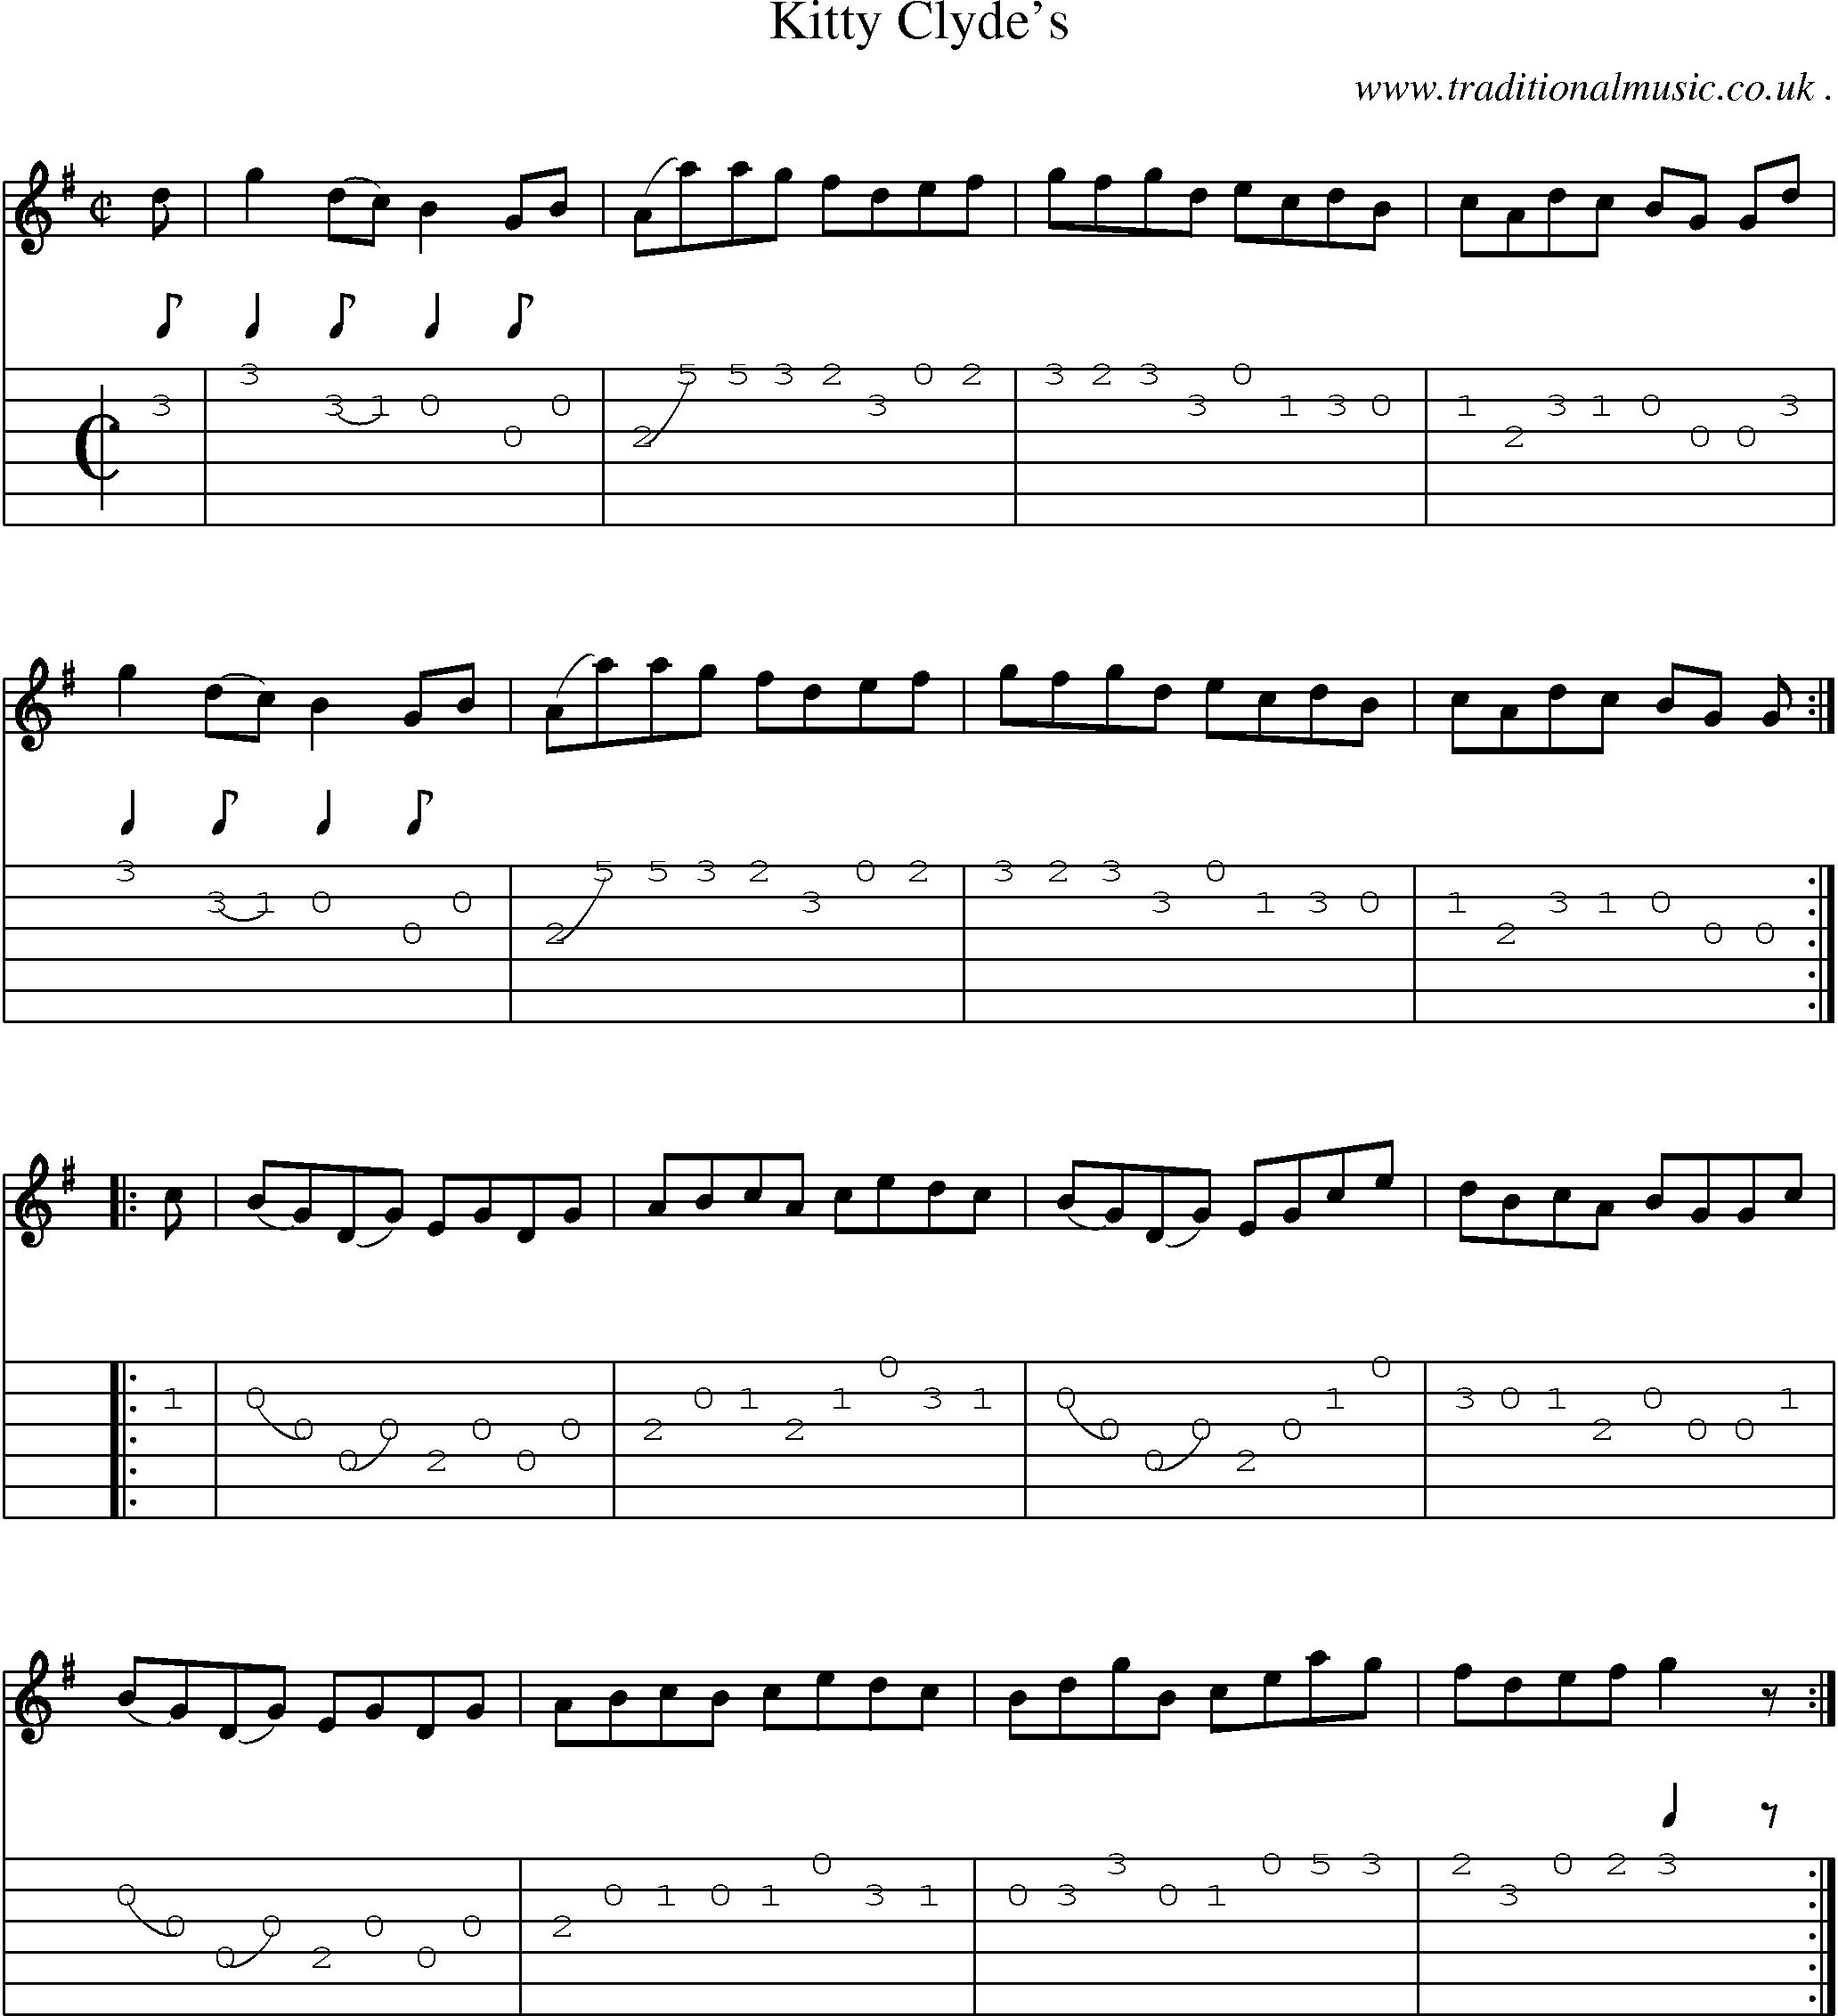 Sheet-Music and Guitar Tabs for Kitty Clydes